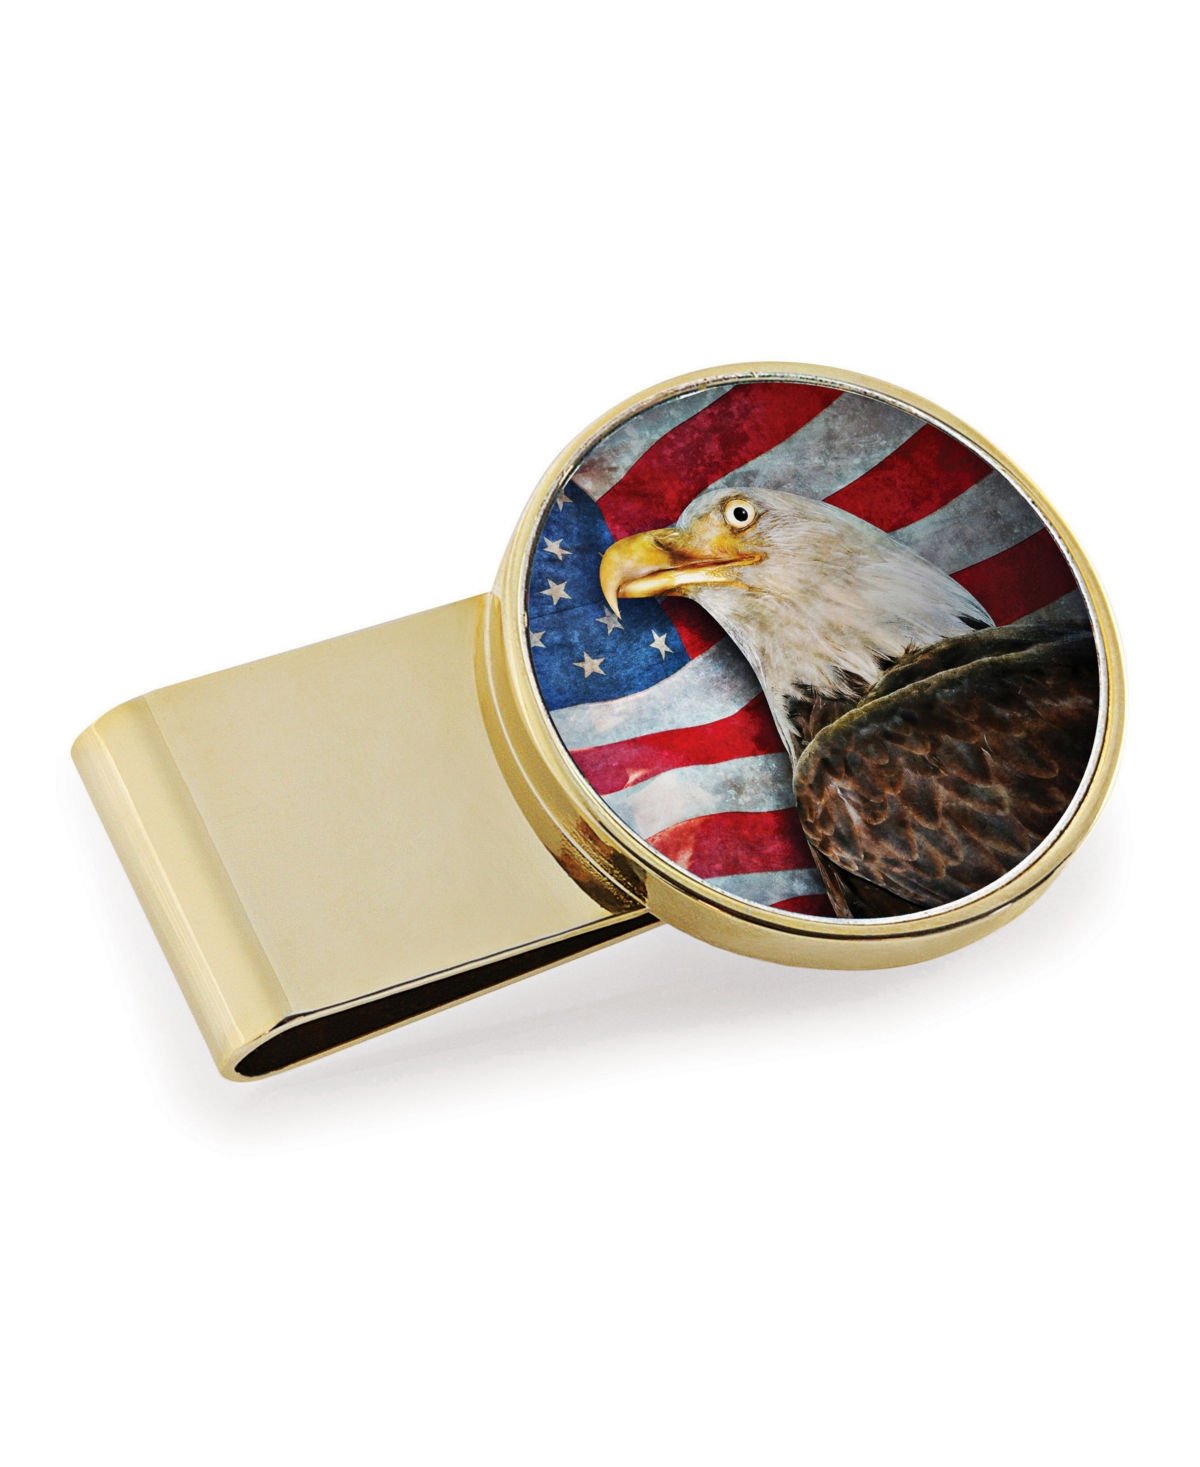 Men's American Coin Treasures American Bald Eagle Colorized Jfk Half Dollar Stainless Steel Money Clip - Gold